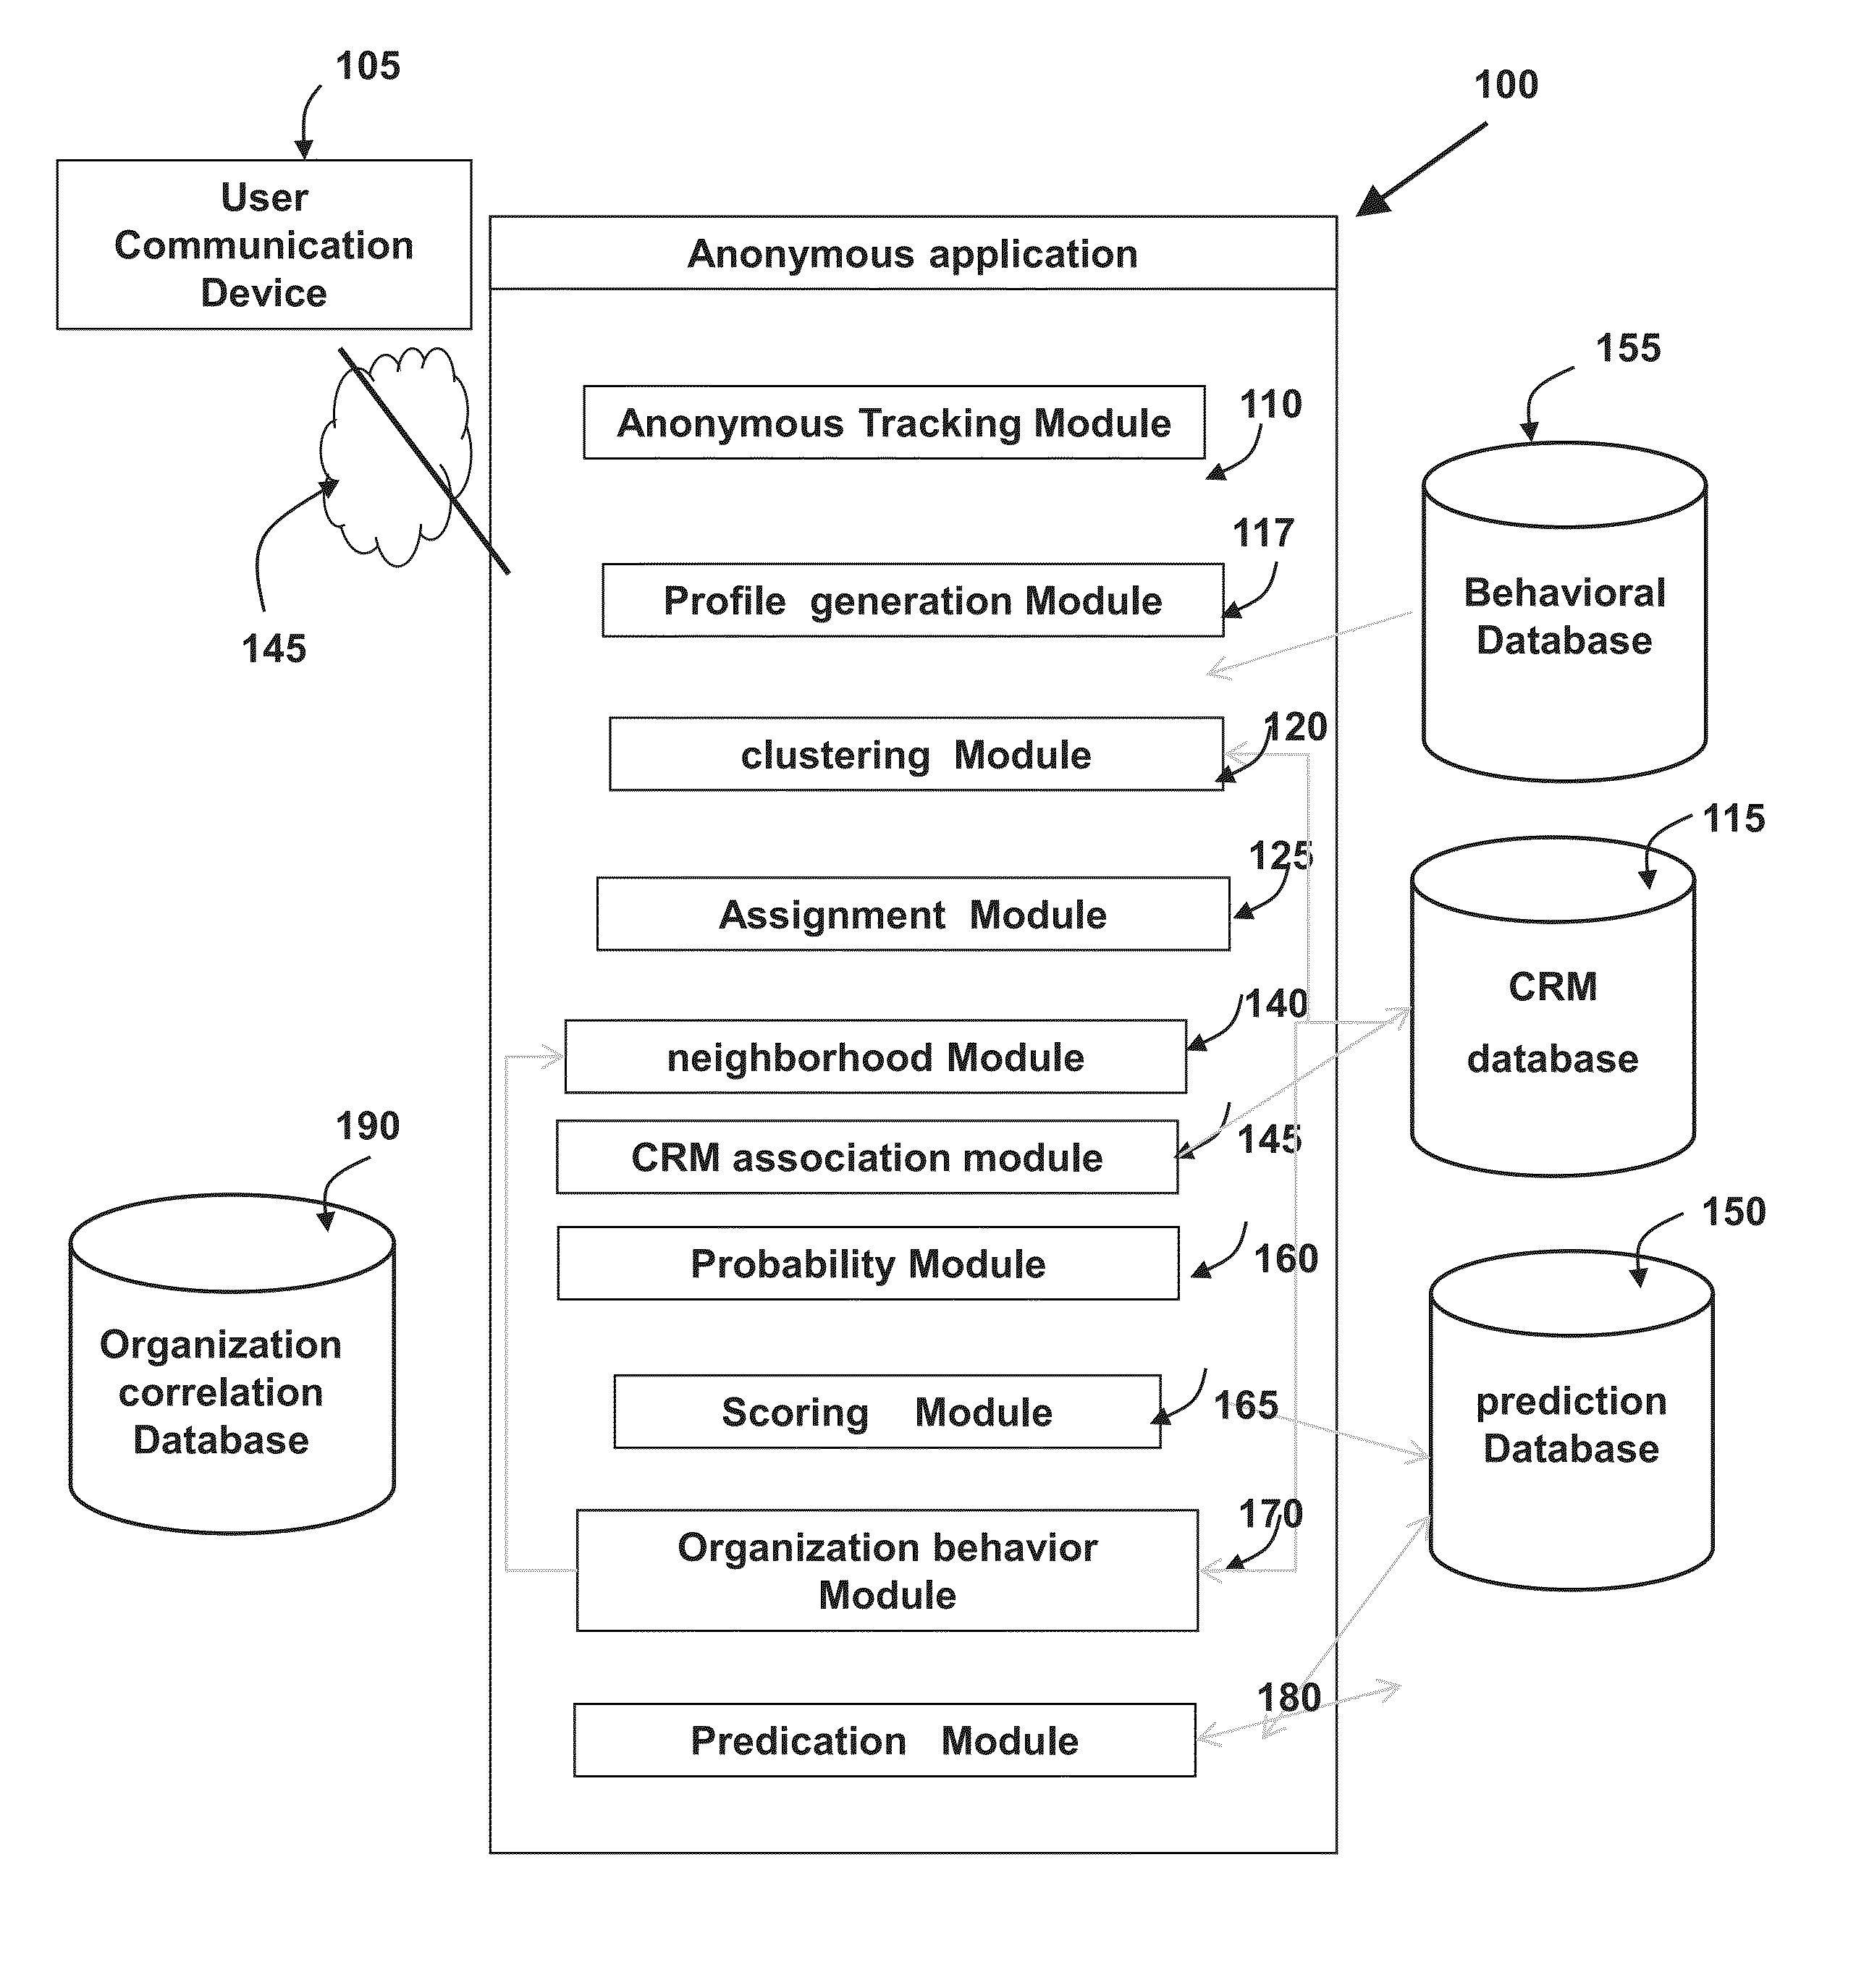 Method and system for predictive marketing campigns based on users online behavior and profile